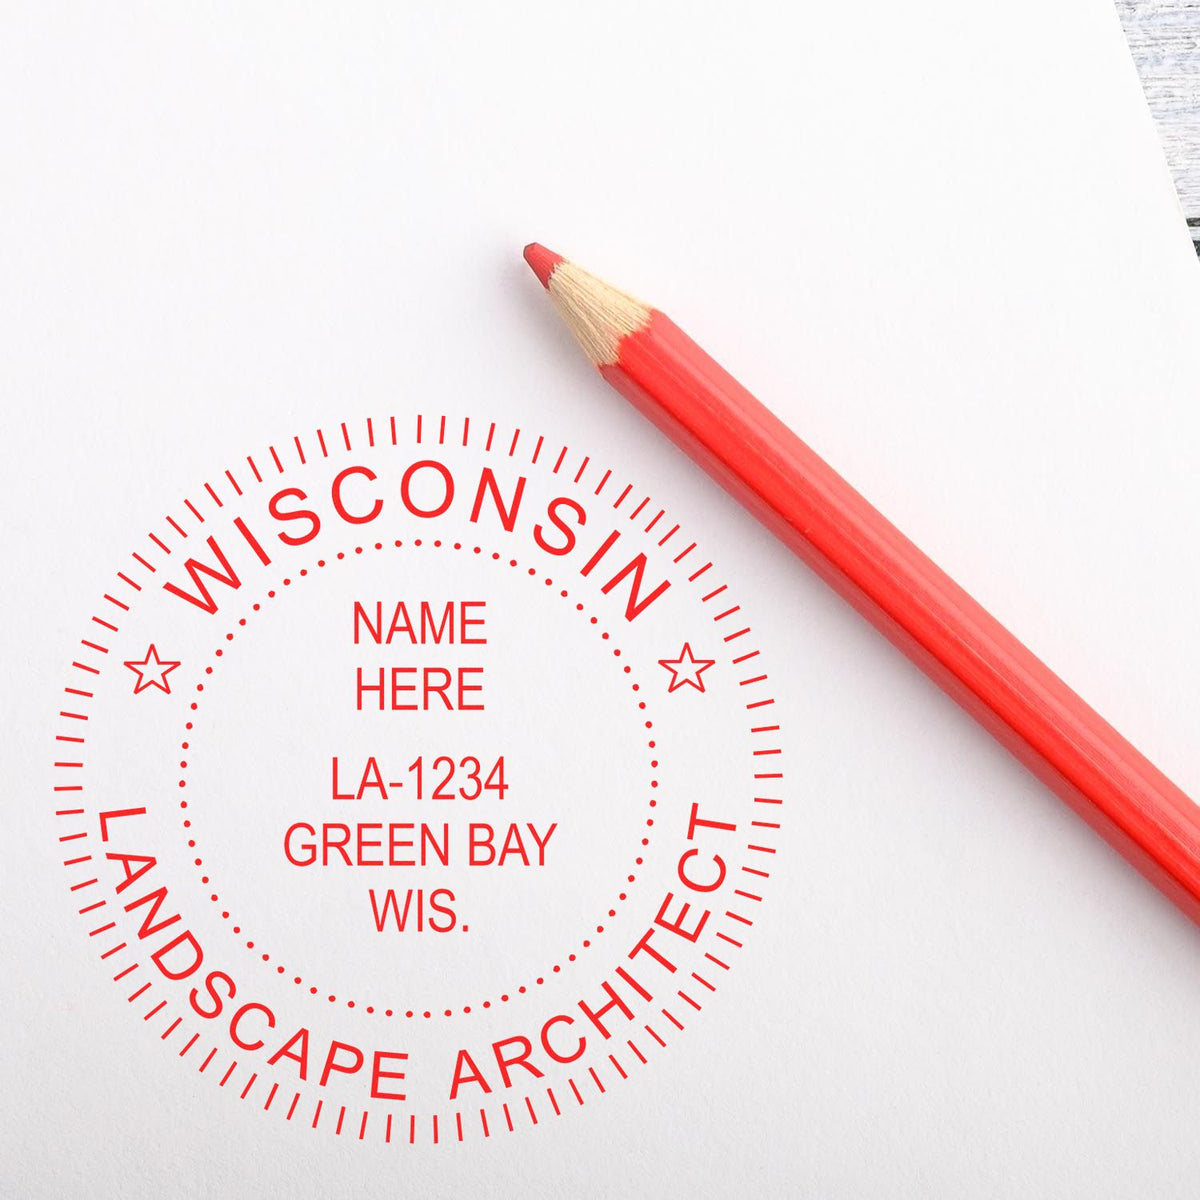 A photograph of the Digital Wisconsin Landscape Architect Stamp stamp impression reveals a vivid, professional image of the on paper.